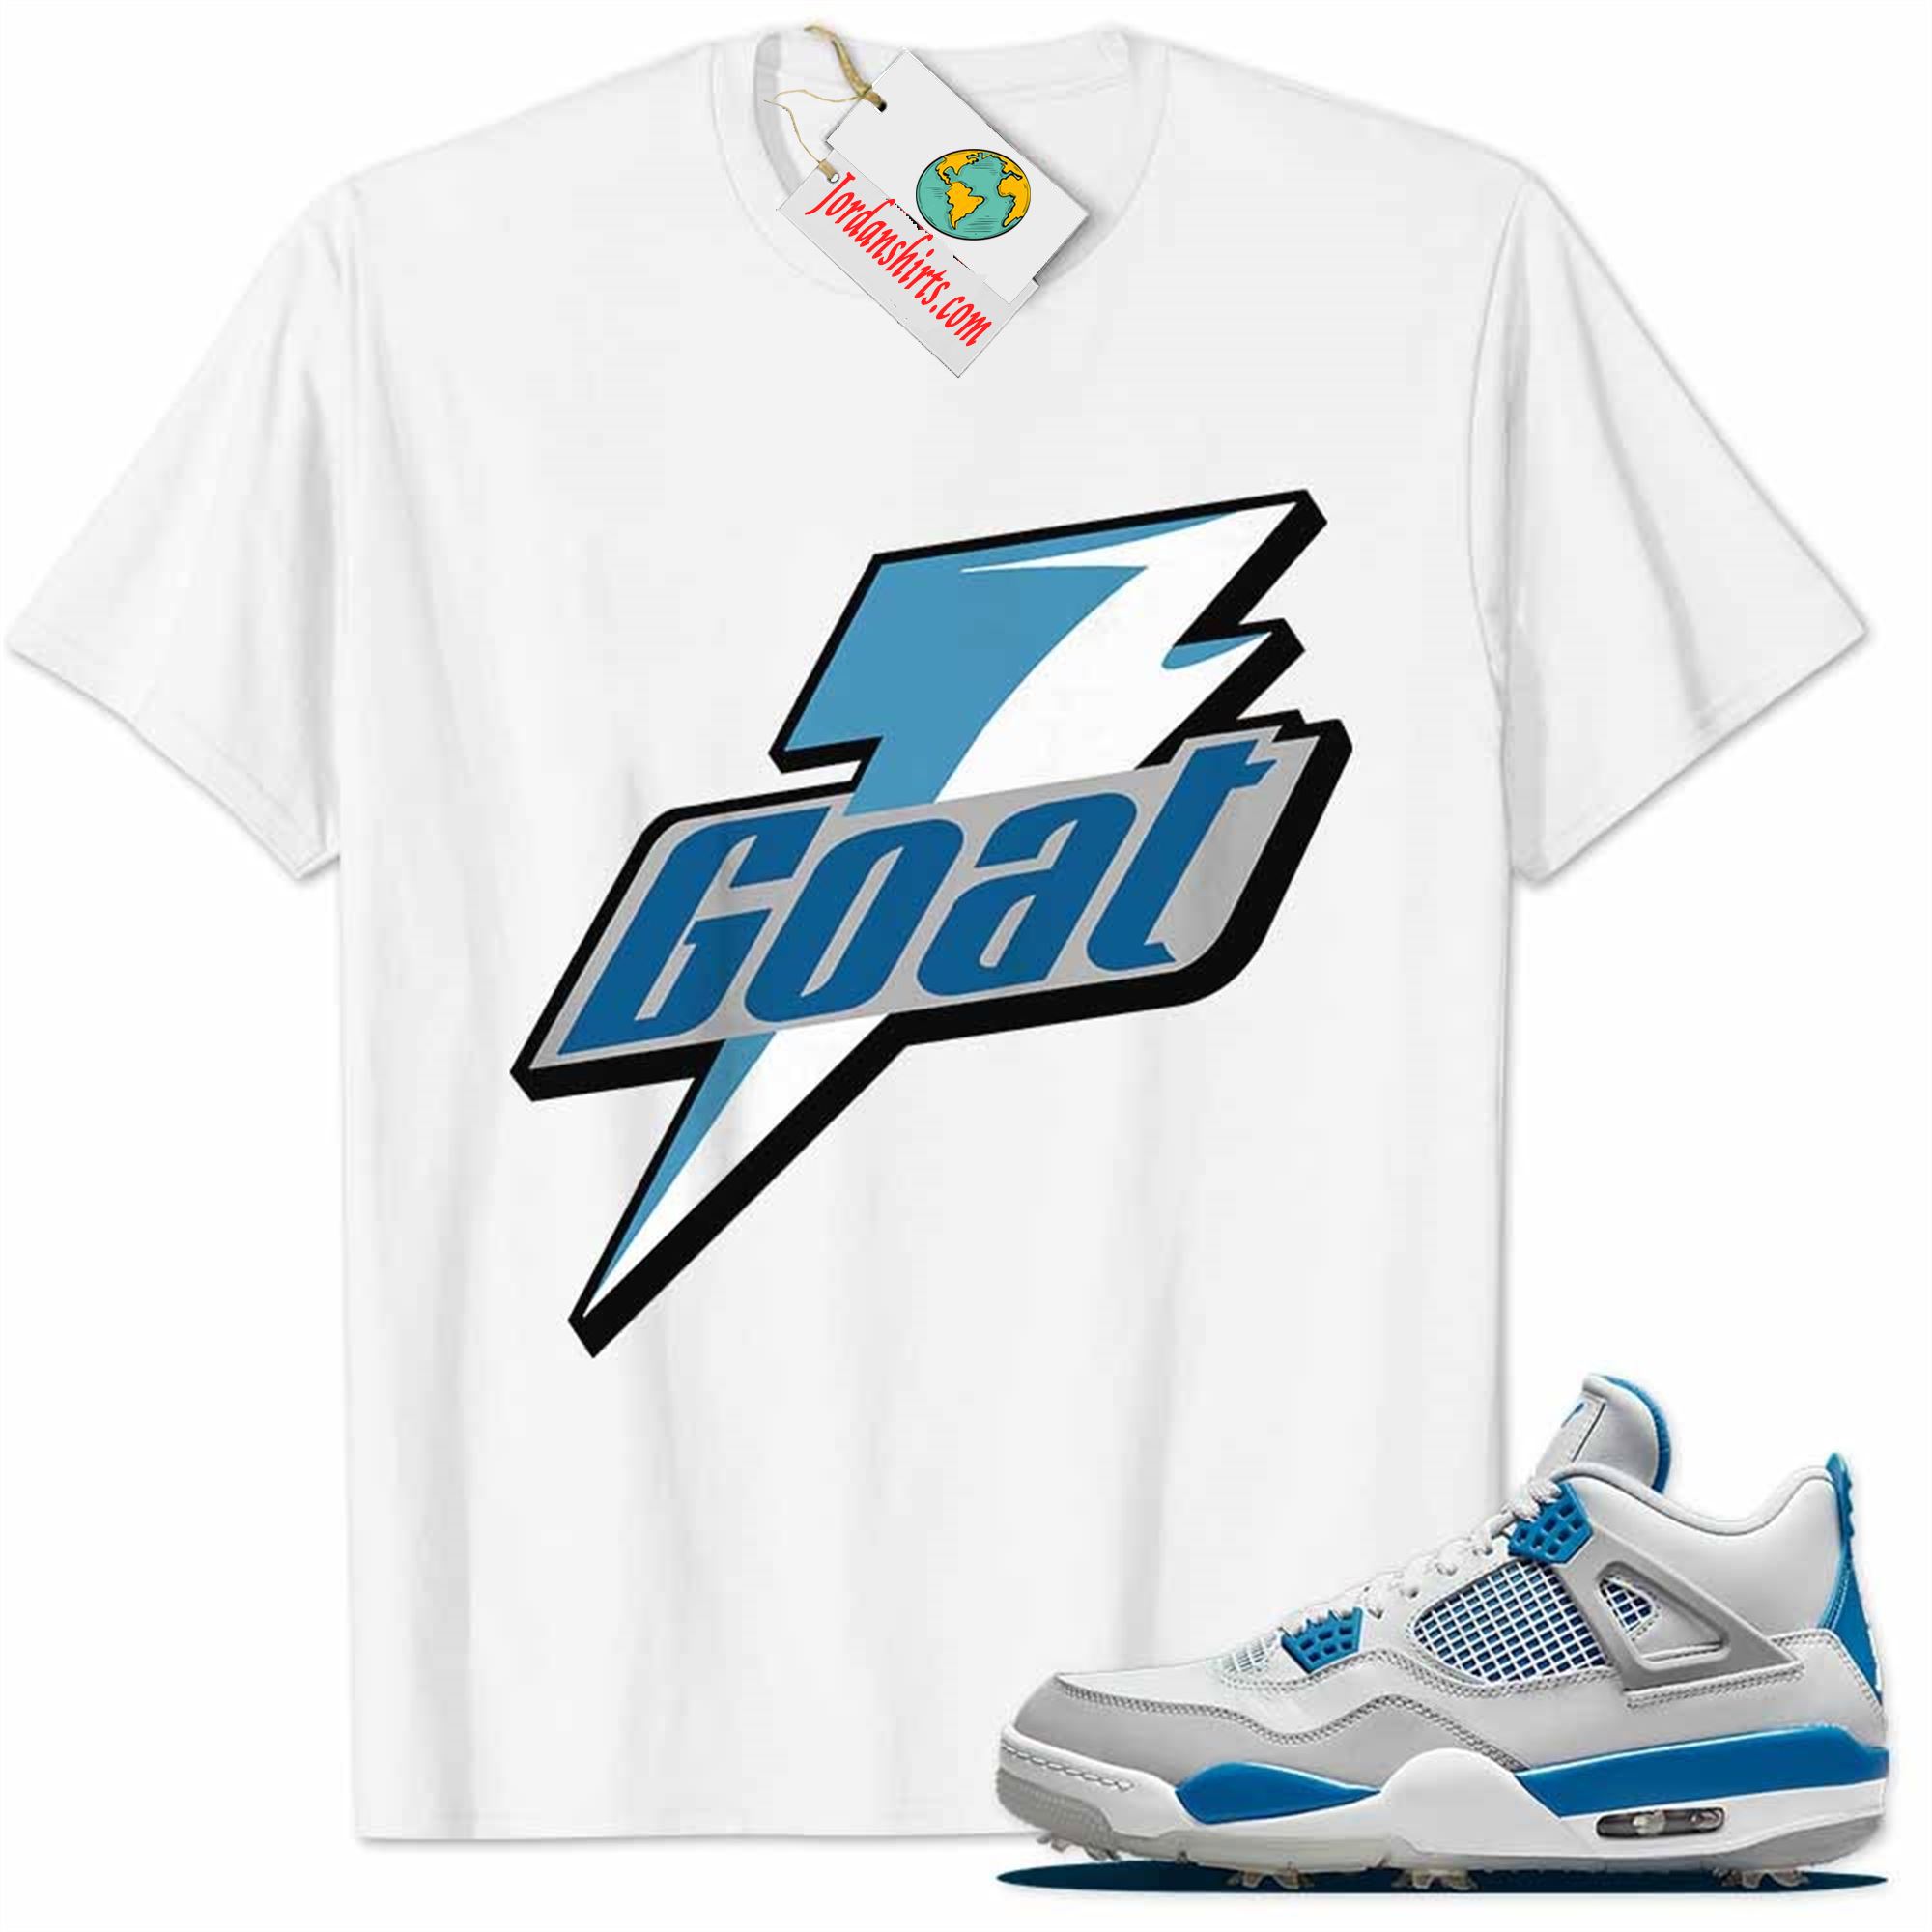 Jordan 4 Shirt, Golf Military Blue 4s Shirt Goat Greatest Of All Time White Plus Size Up To 5xl